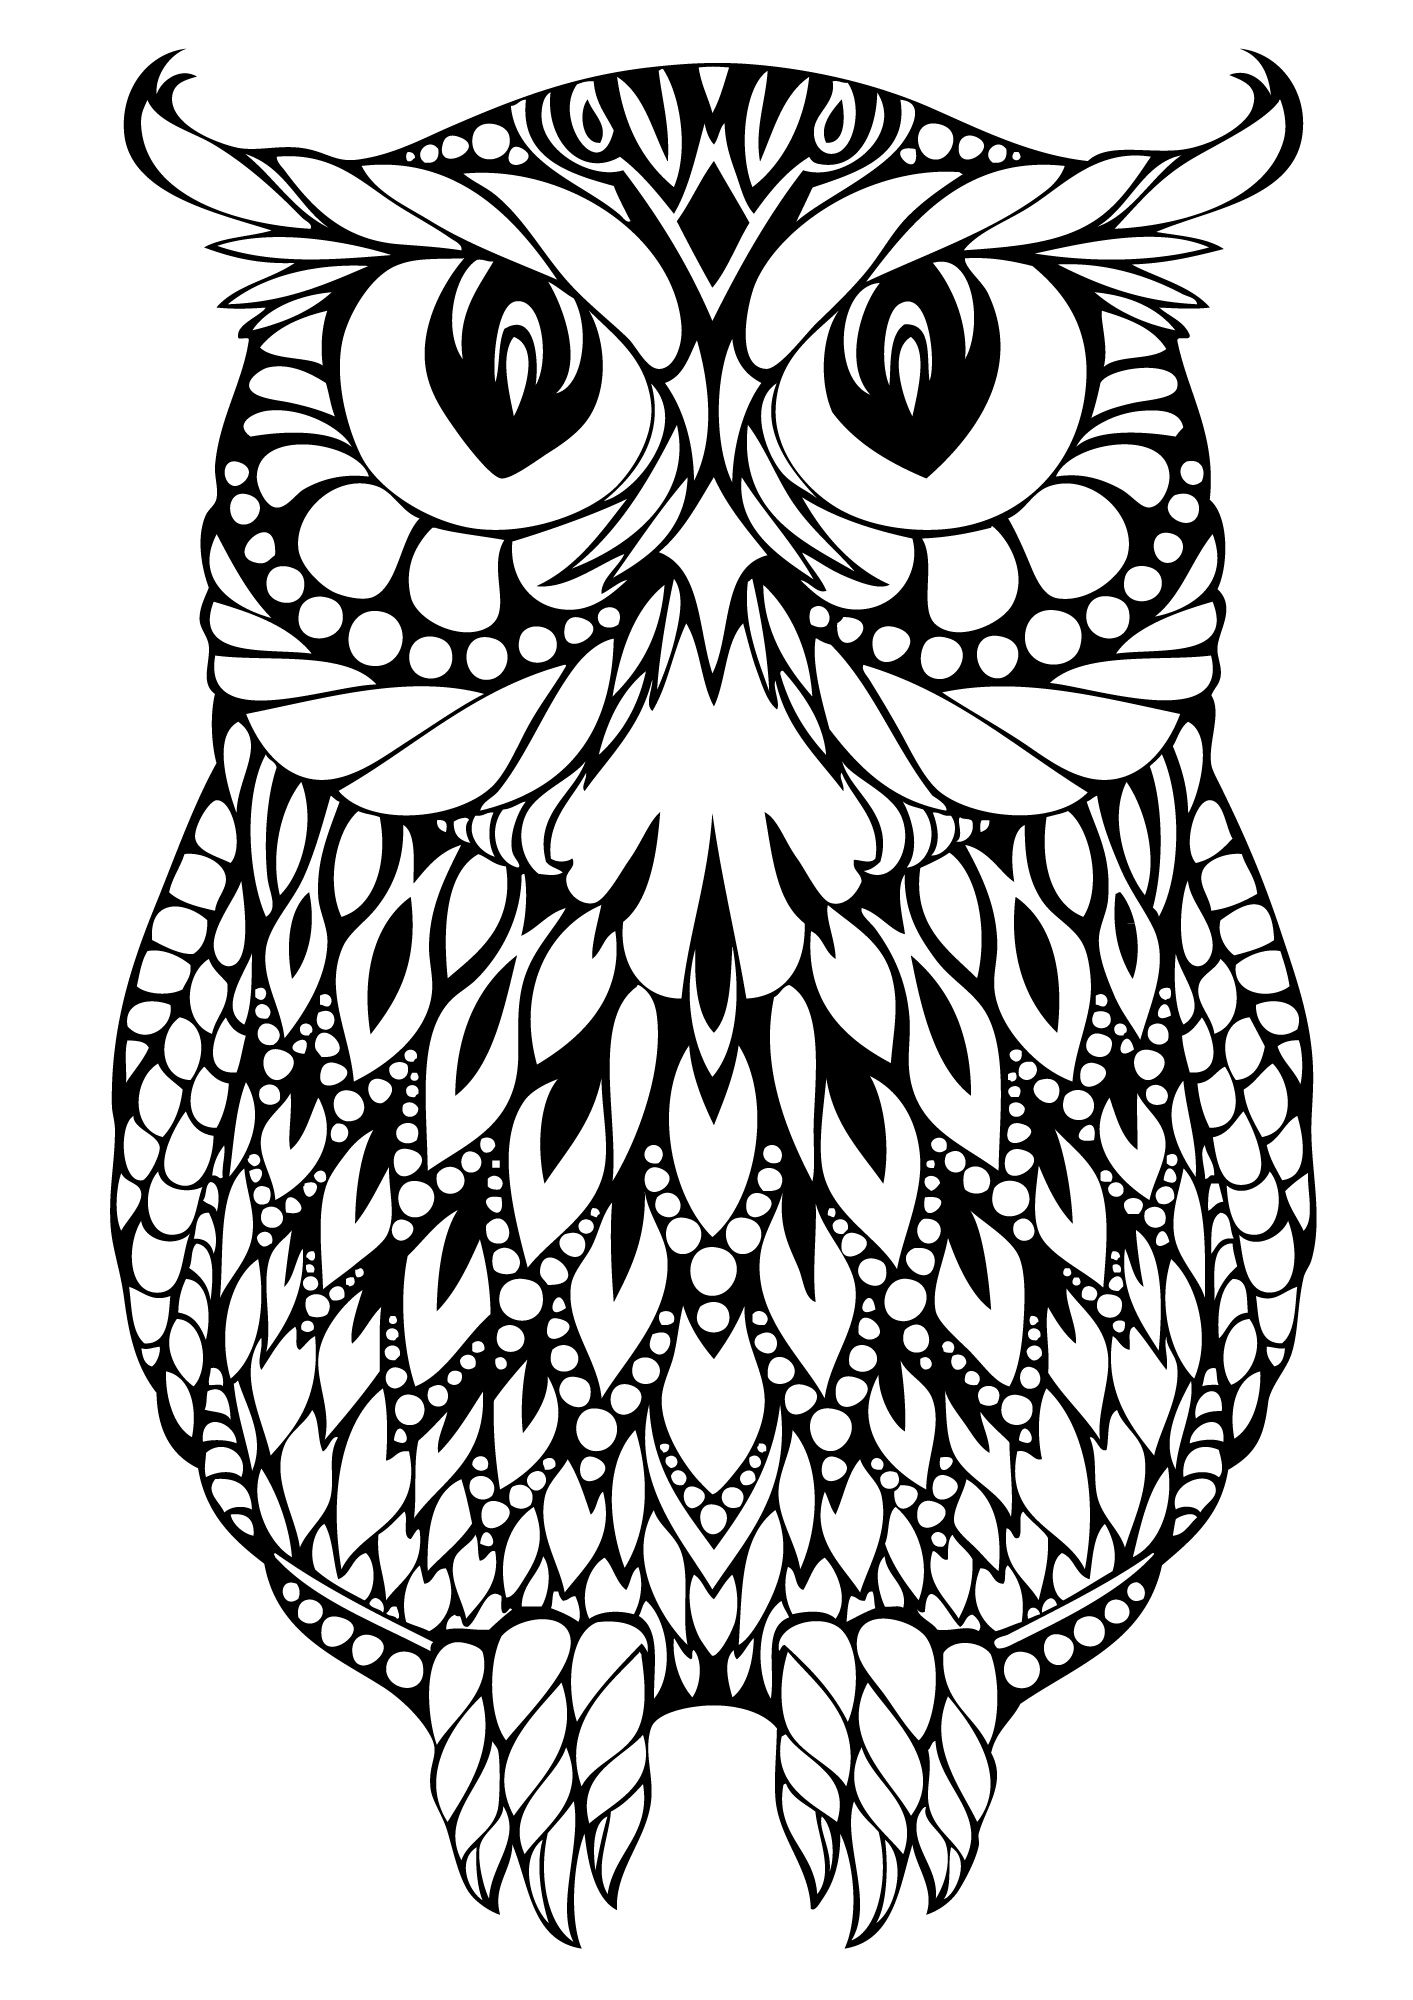 coloring pages owl owl coloring pages adult coloring pages coloring owl coloring owl pages 